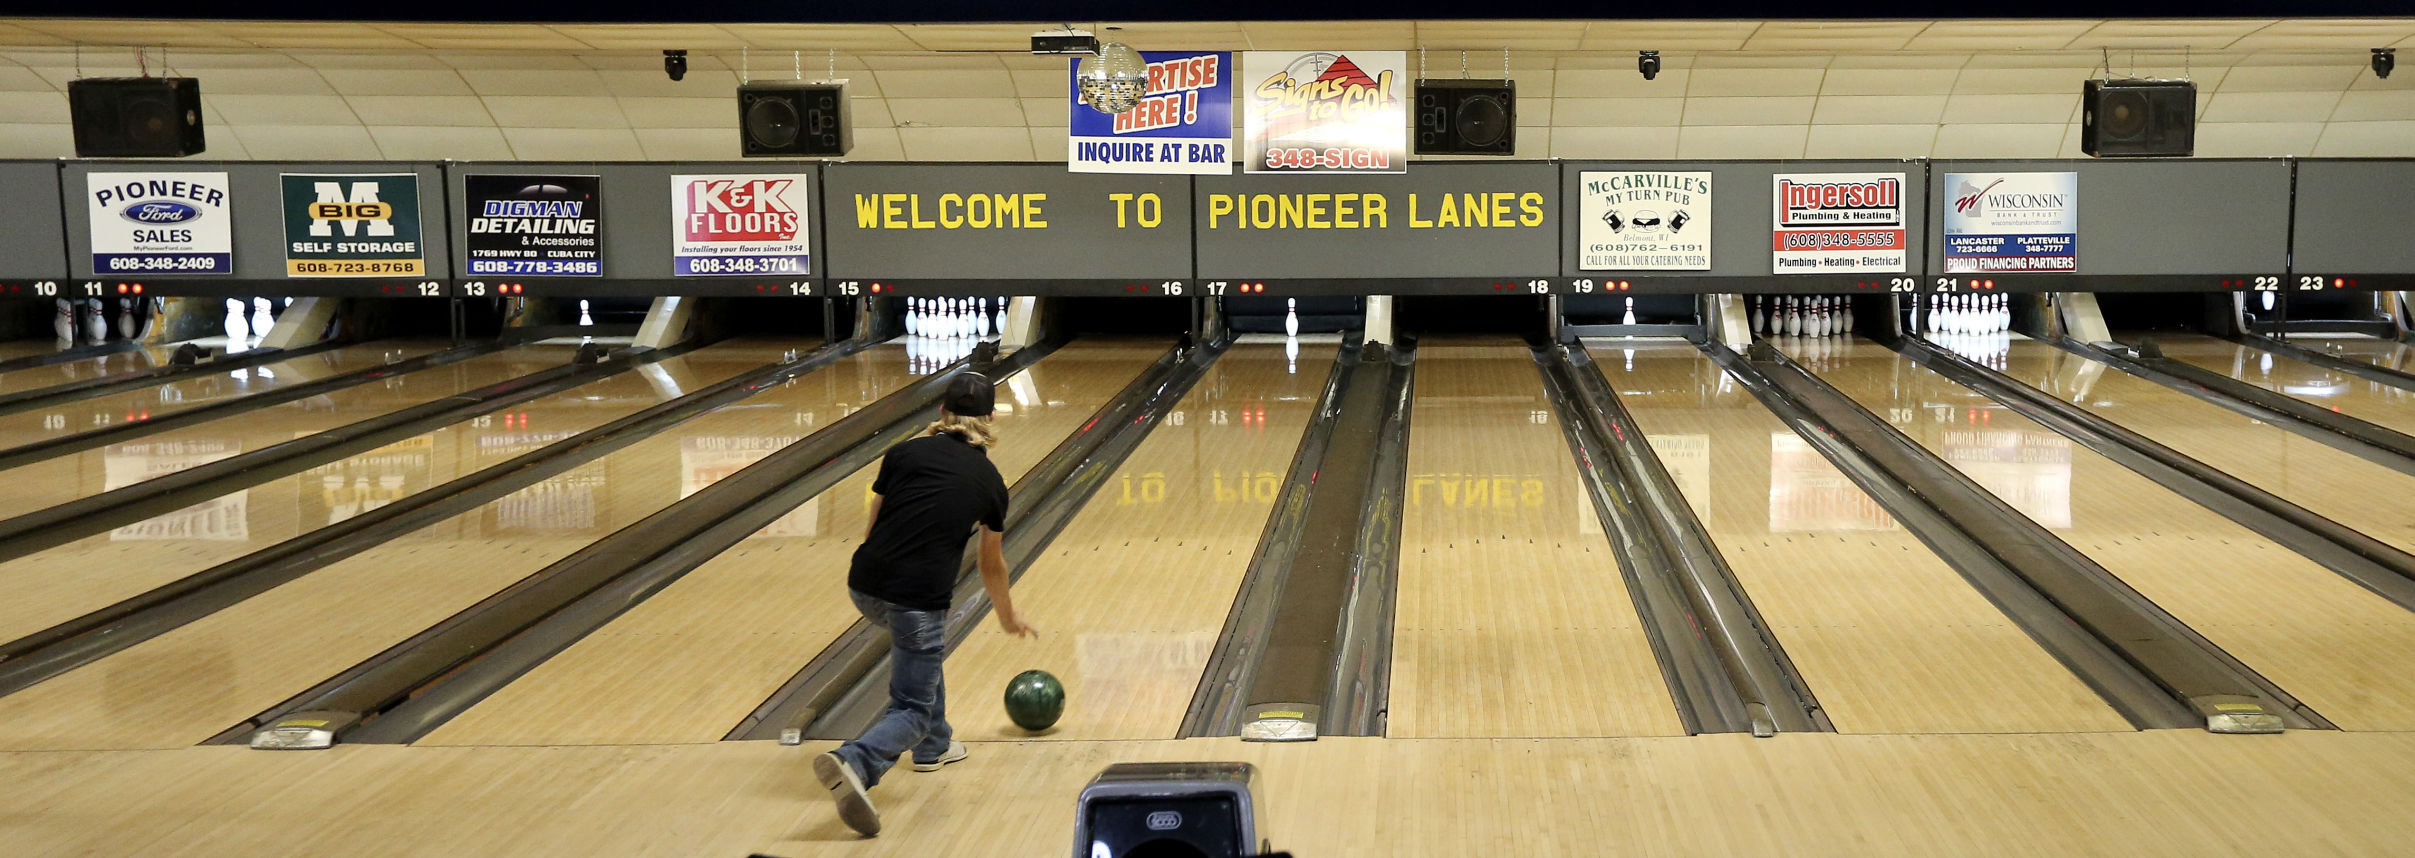 On too many occasions recently, Pioneer Lanes has not featured many bowlers. PHOTO CREDIT: Dave Kettering, Telegraph Herald